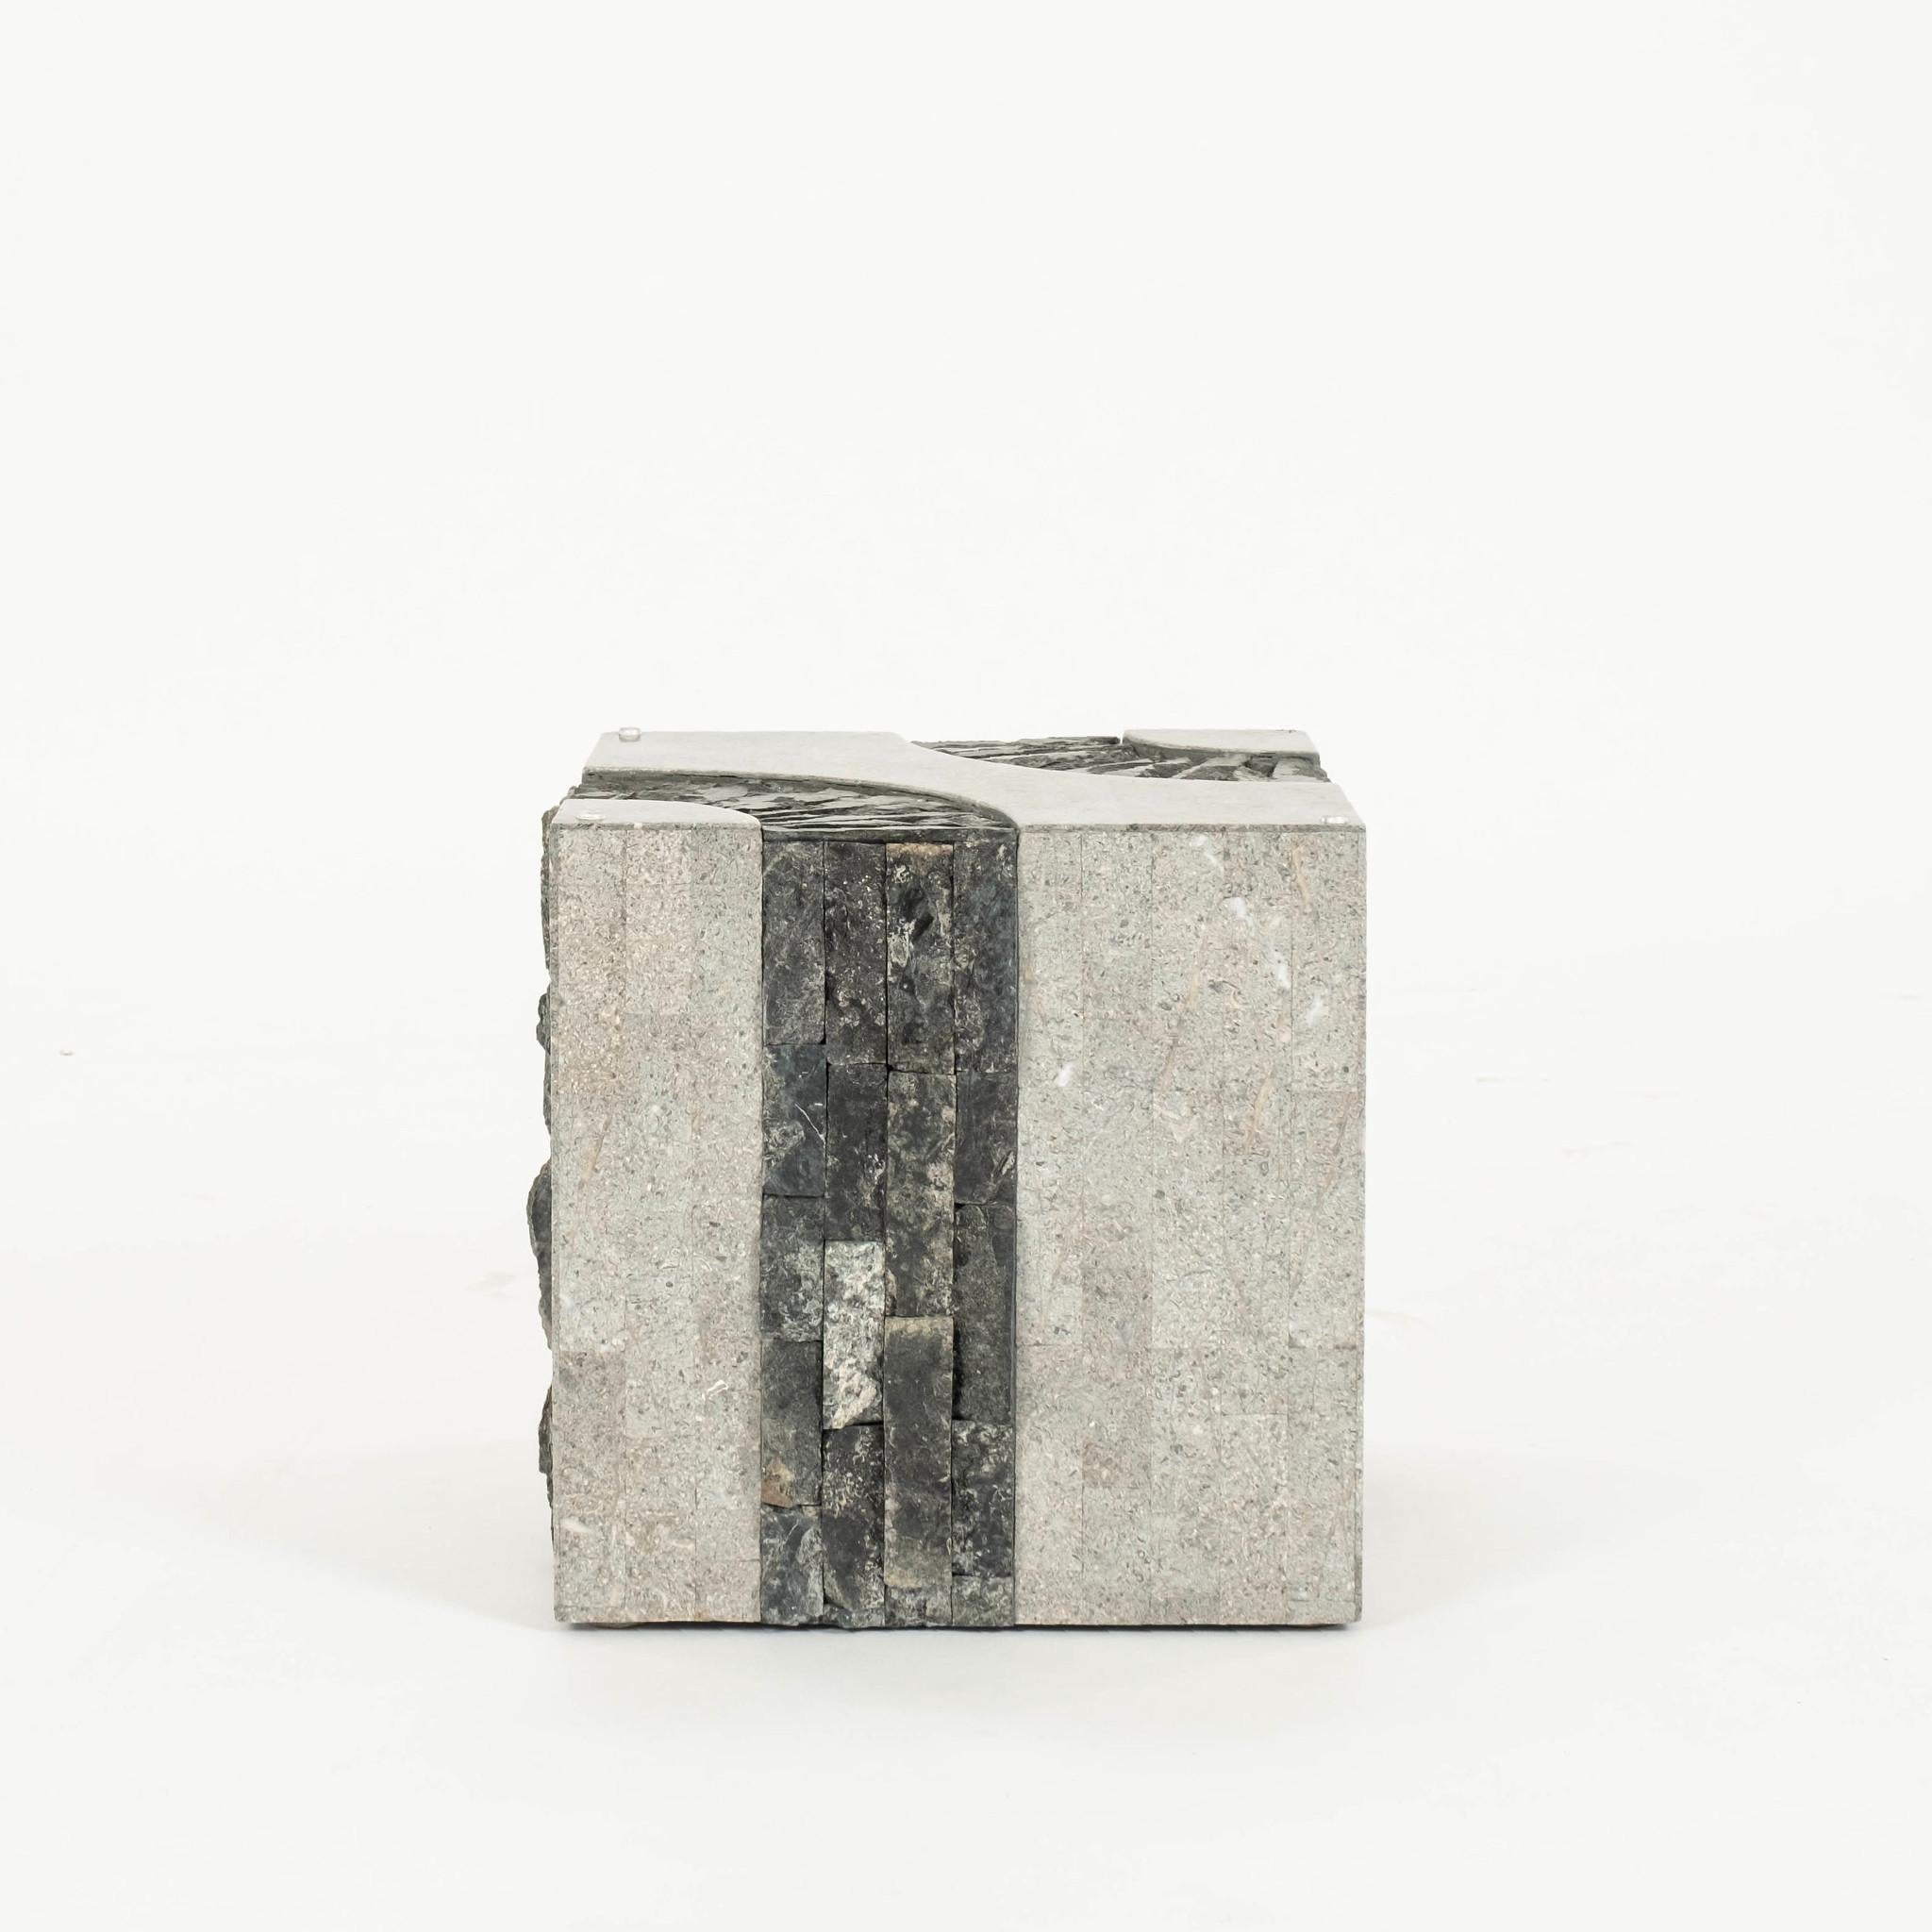 Organic Modern Tessellated Black White Gray Stone Cube Occasional Table For Sale